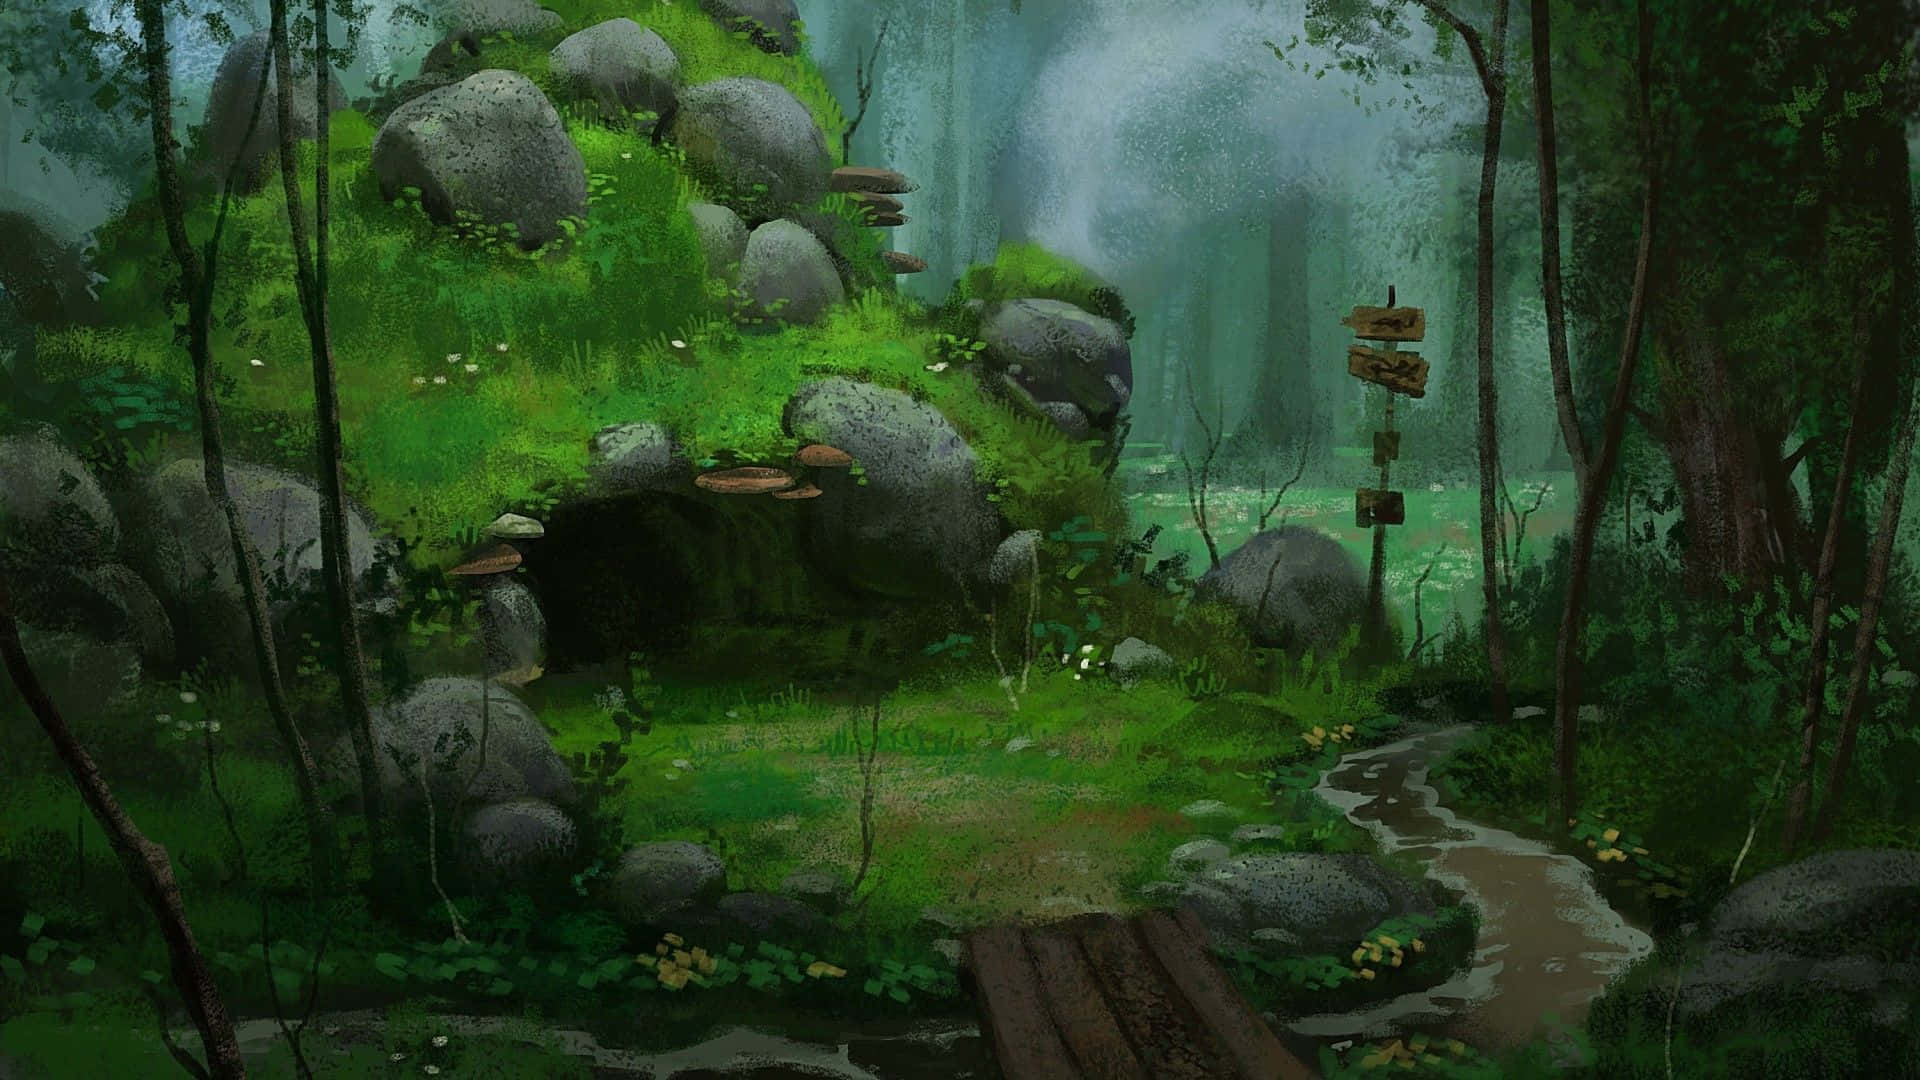 Get lost in the beauty of this Anime-inspired forest. Wallpaper